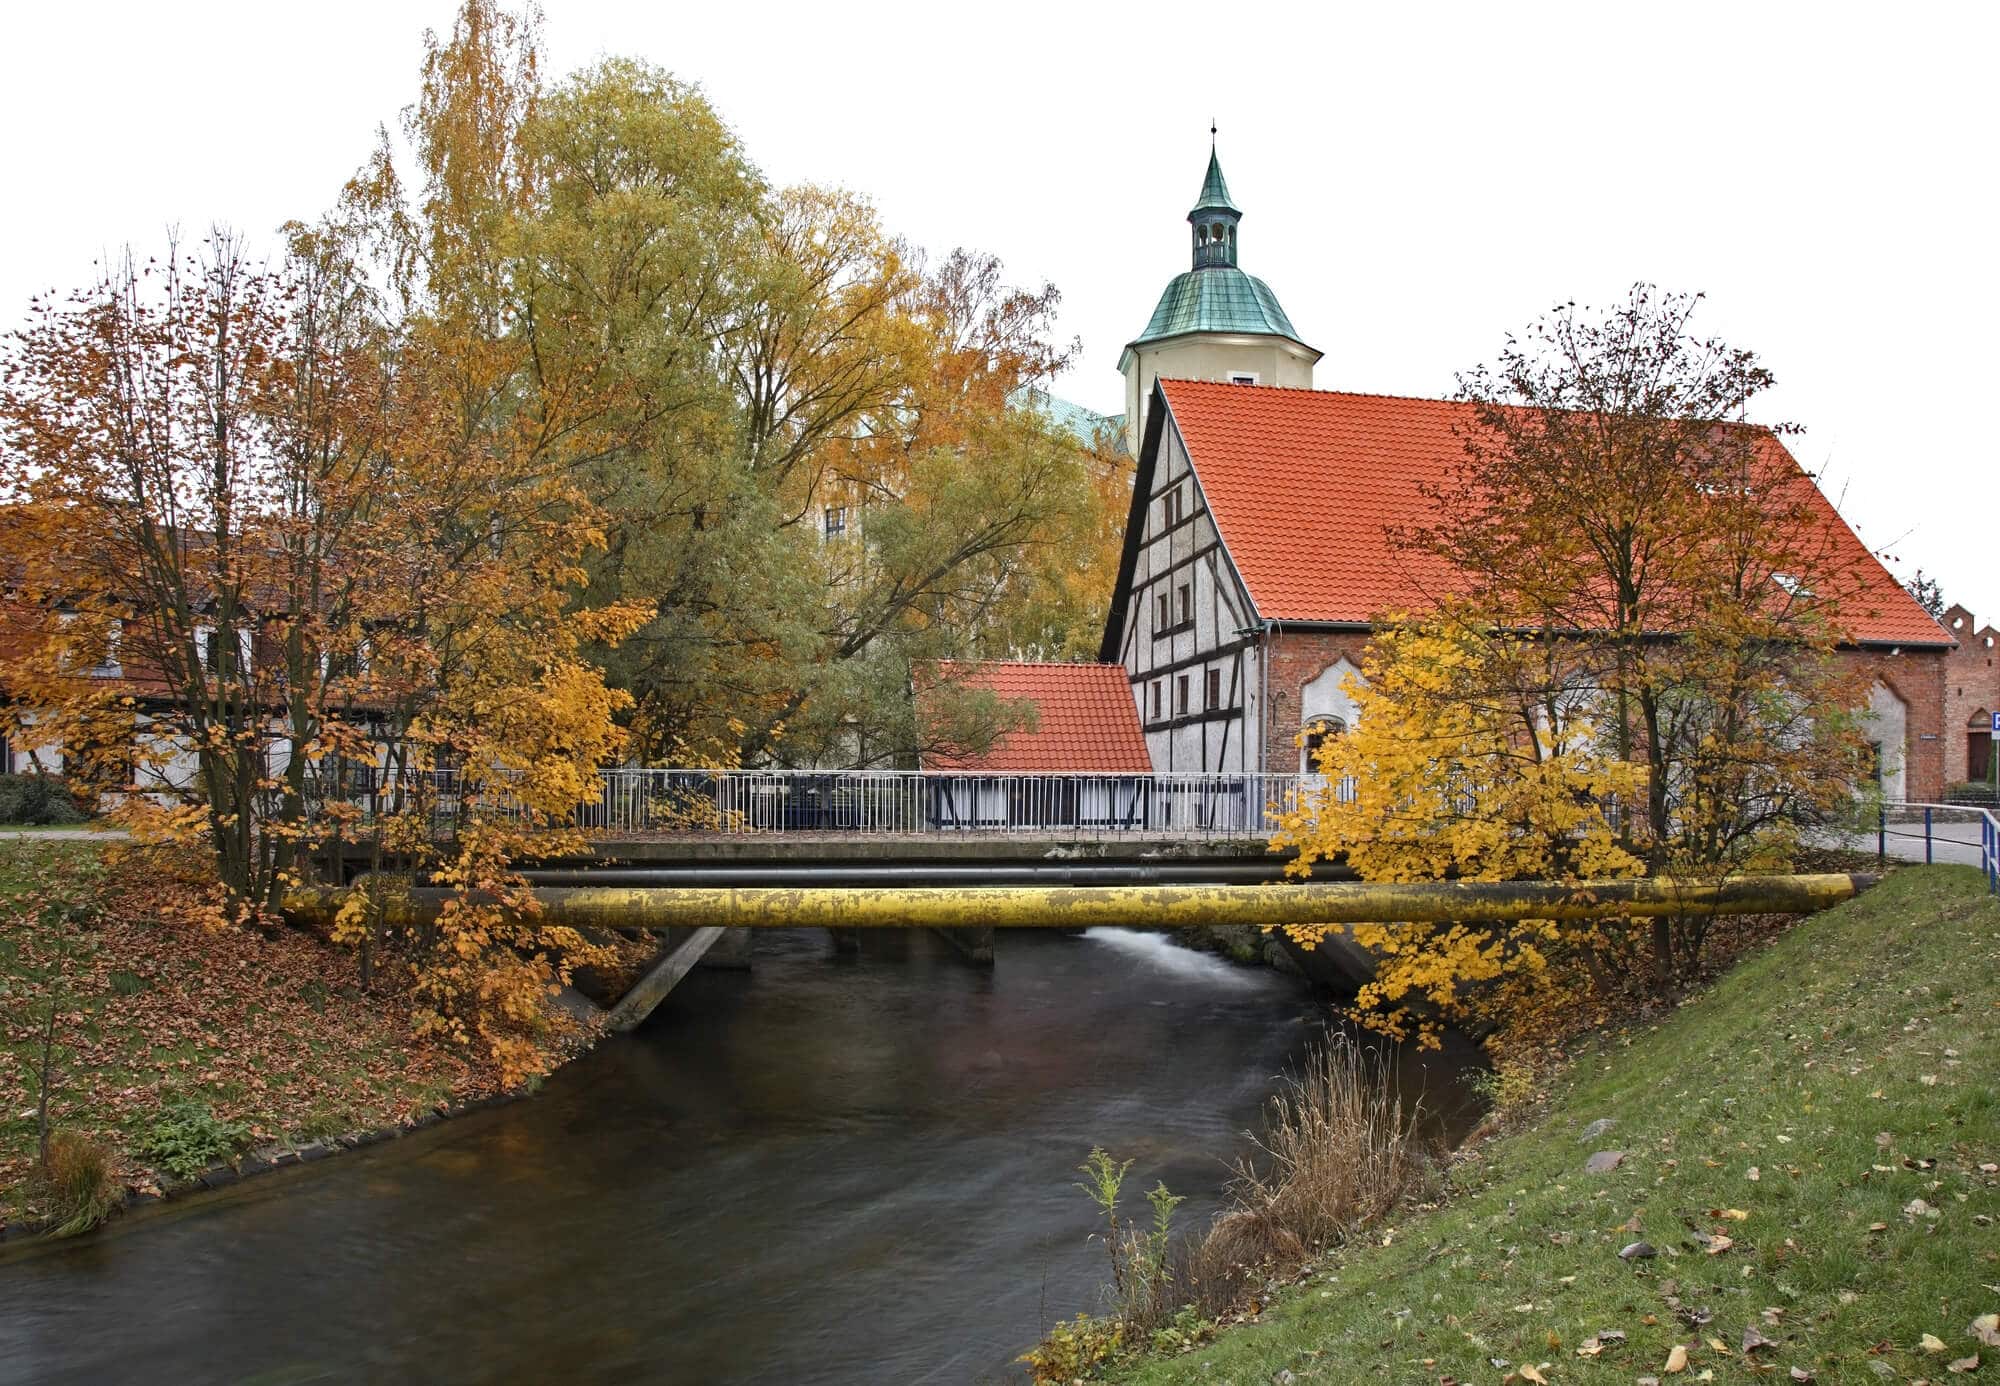 A bridge over a river with an old tudir style house in the background in Slupsk, a great day trip from Gdansk.